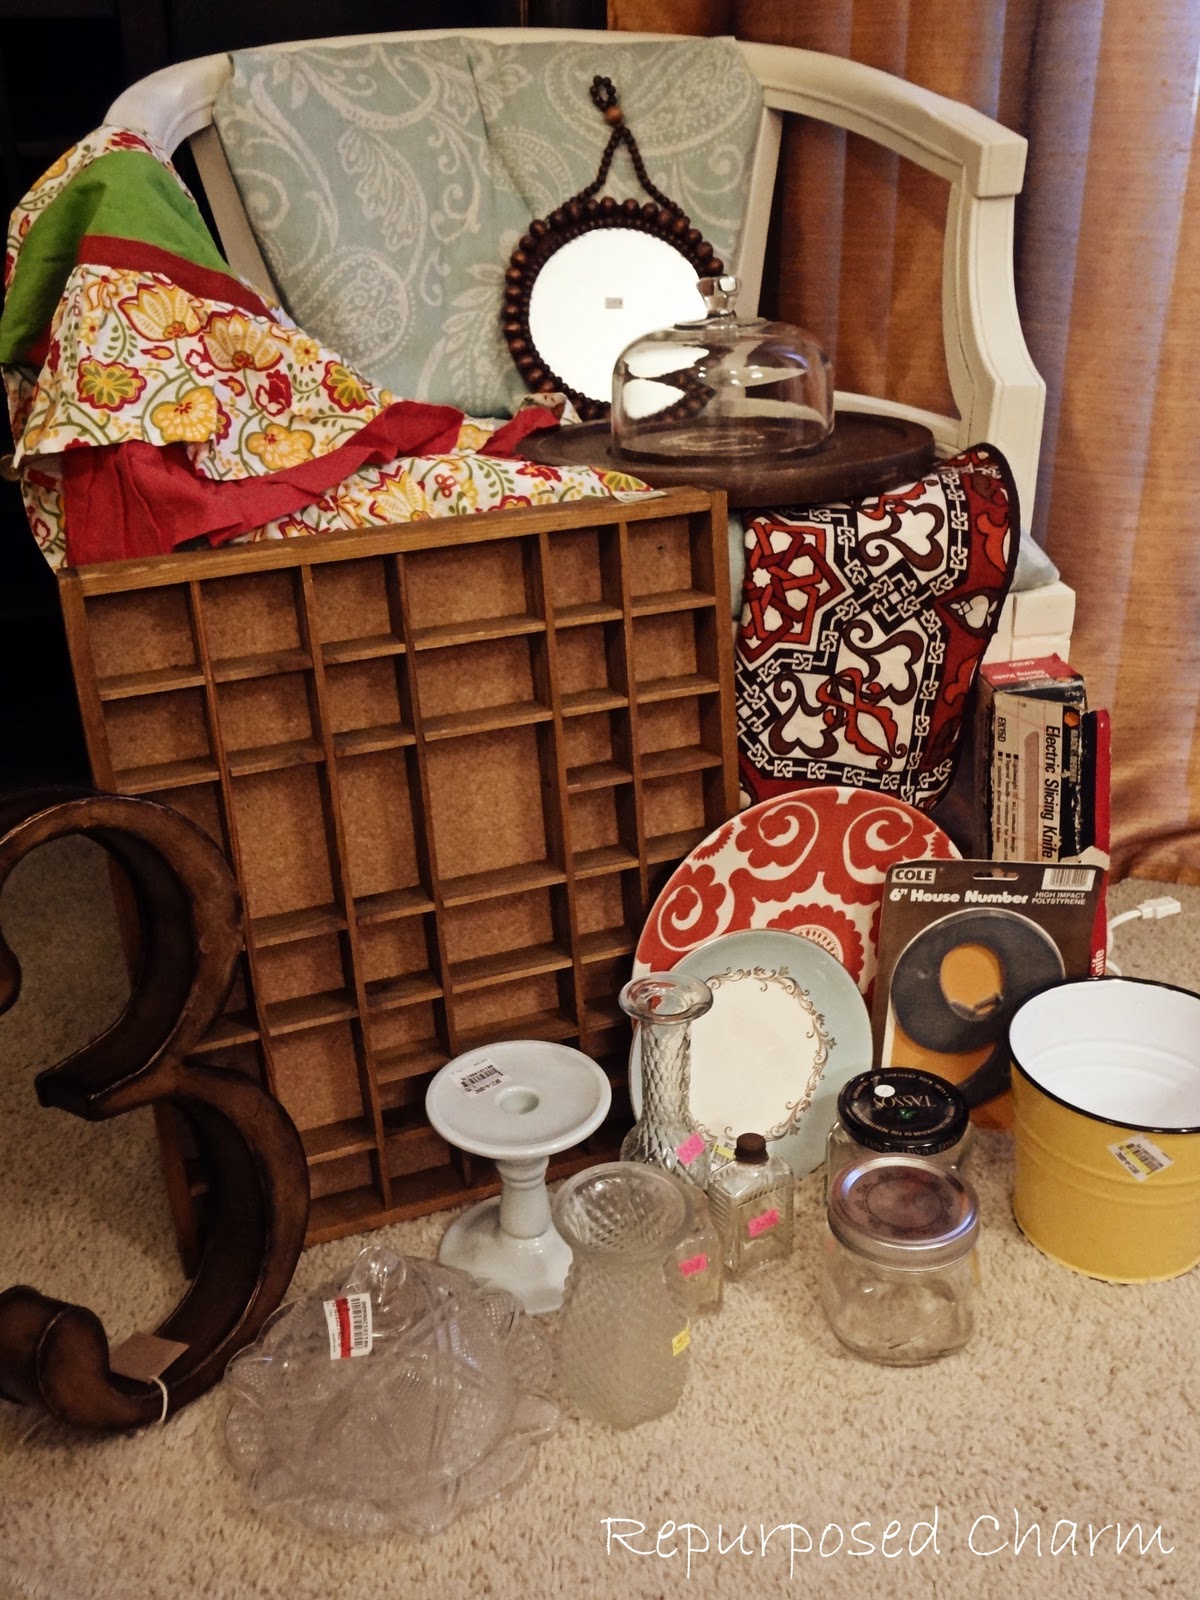 Thrift Store Treasures: Tips For Finding And Refinishing Second Hand Decor